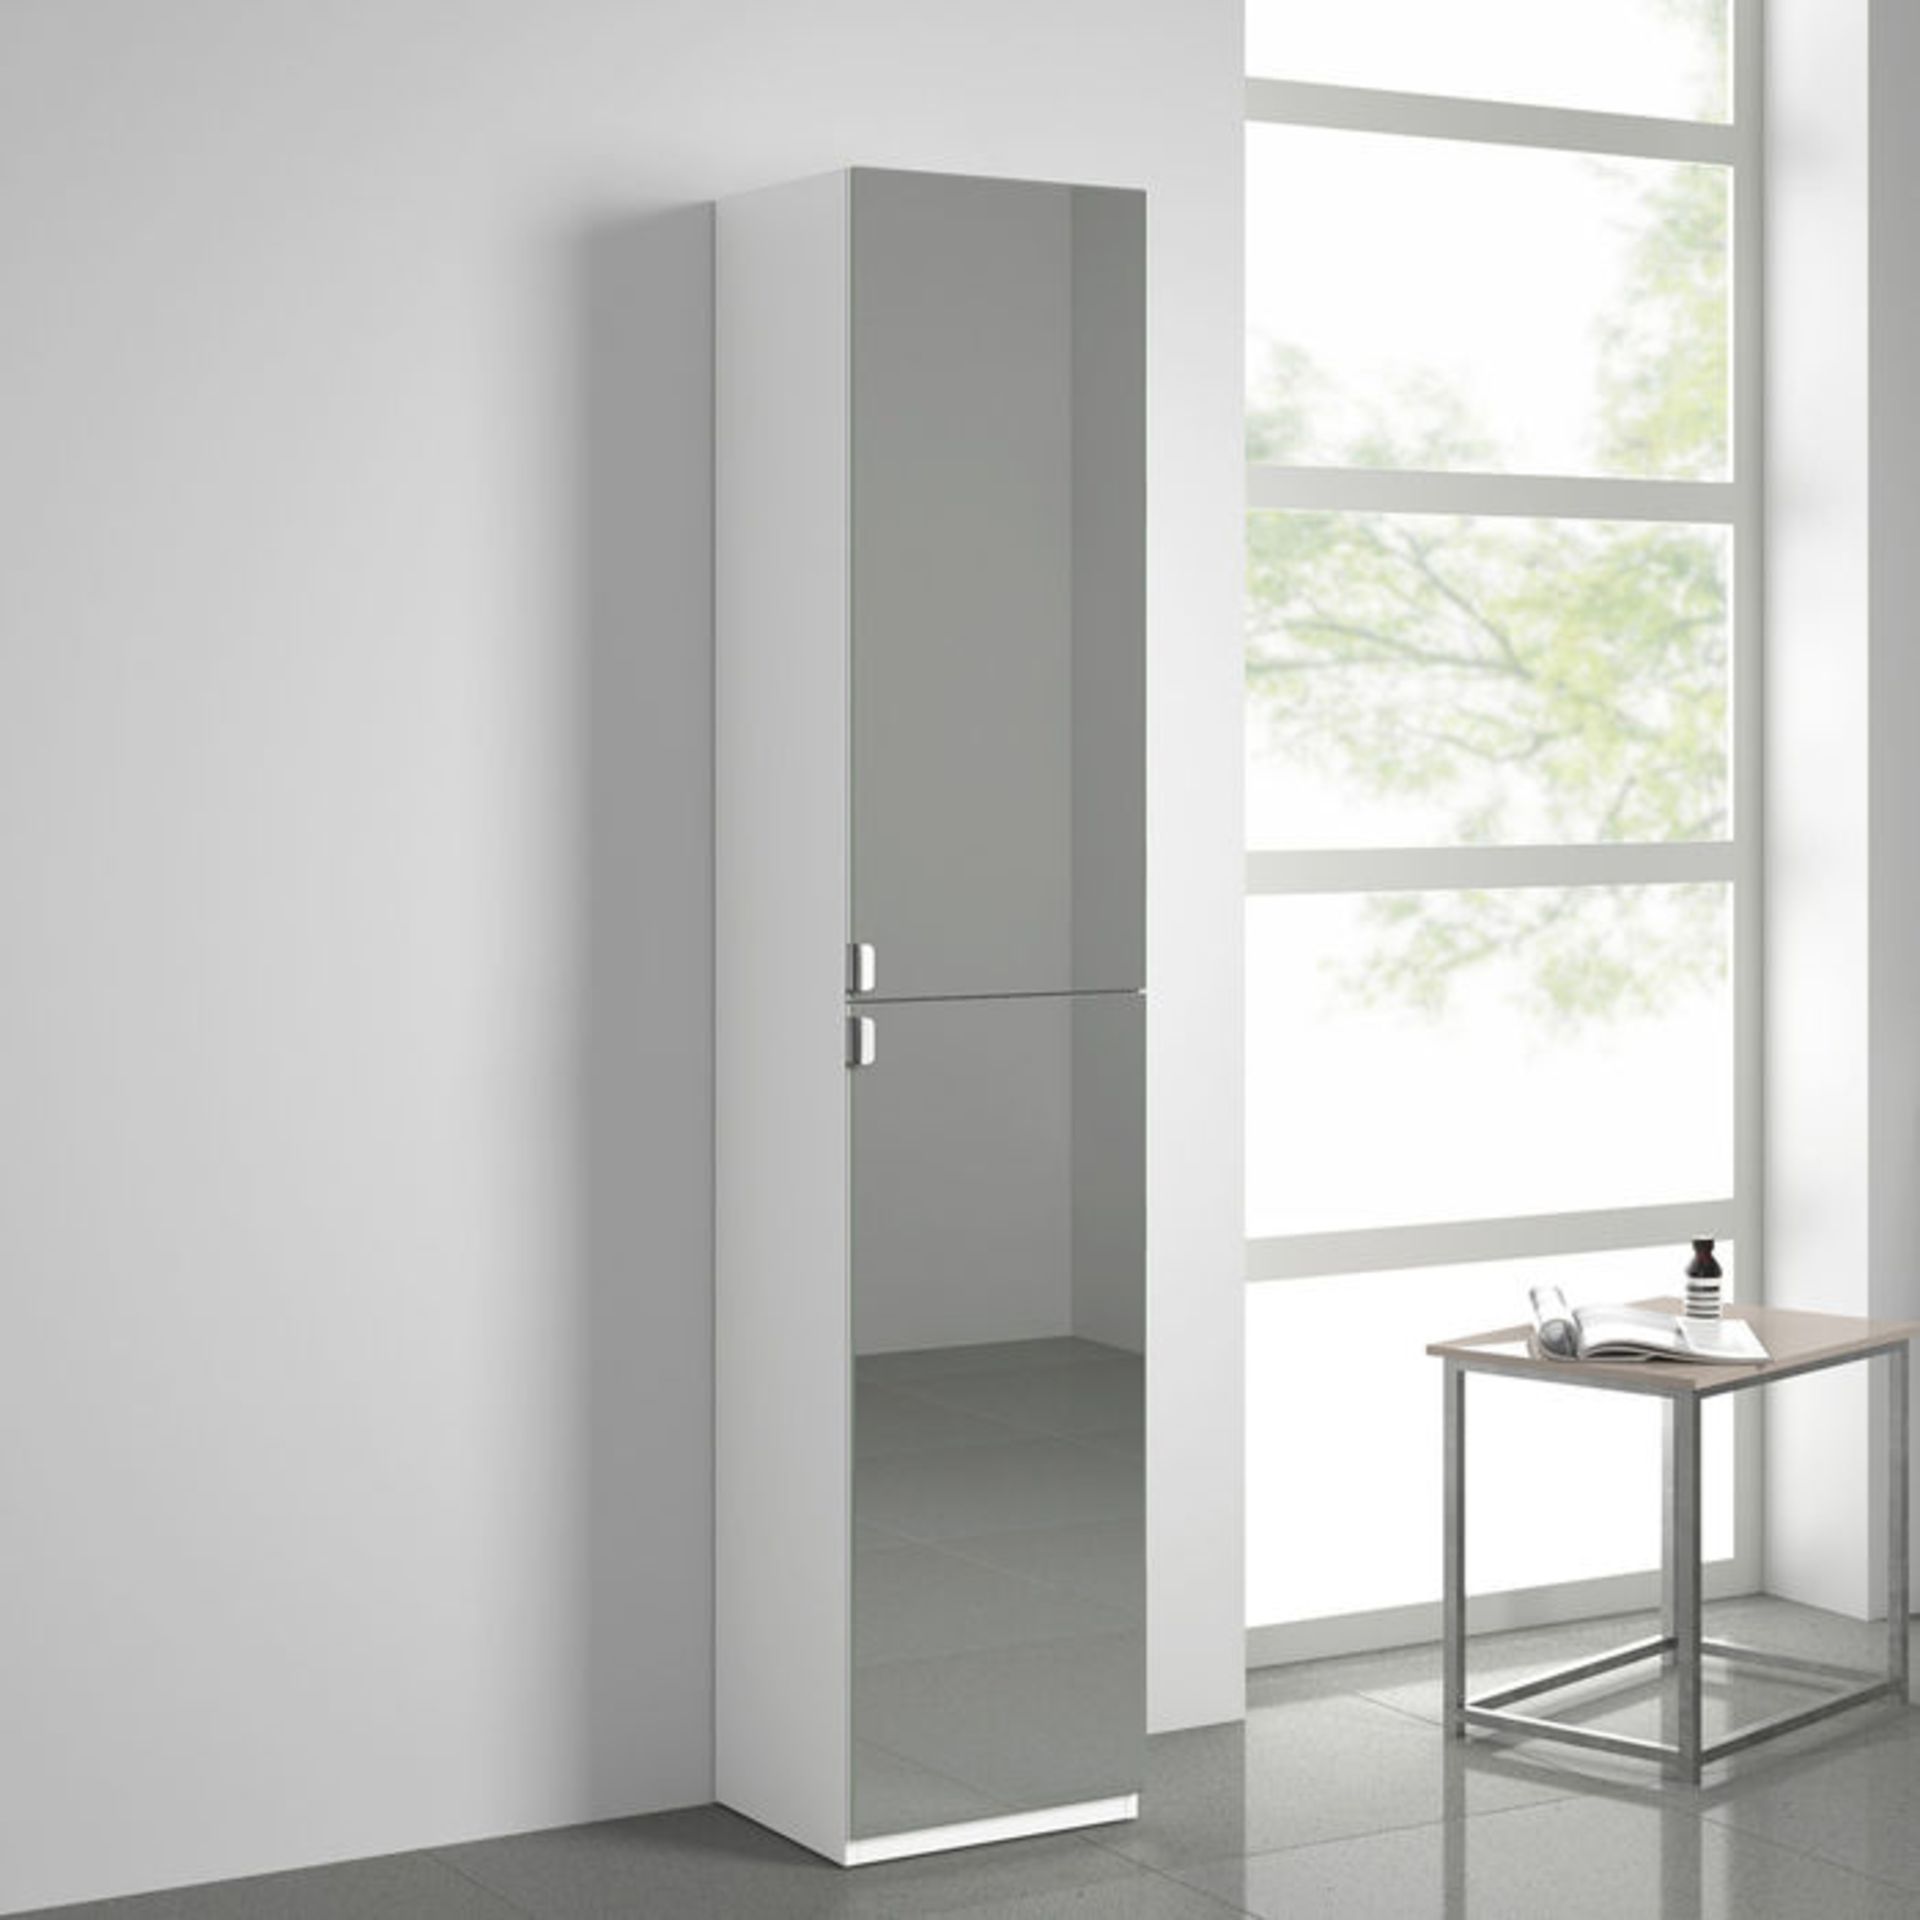 (NY183) 1700x350mm Mirrored Door Matte White Tall Storage Cabinet - Floor Standing. Enjoy the - Image 2 of 4